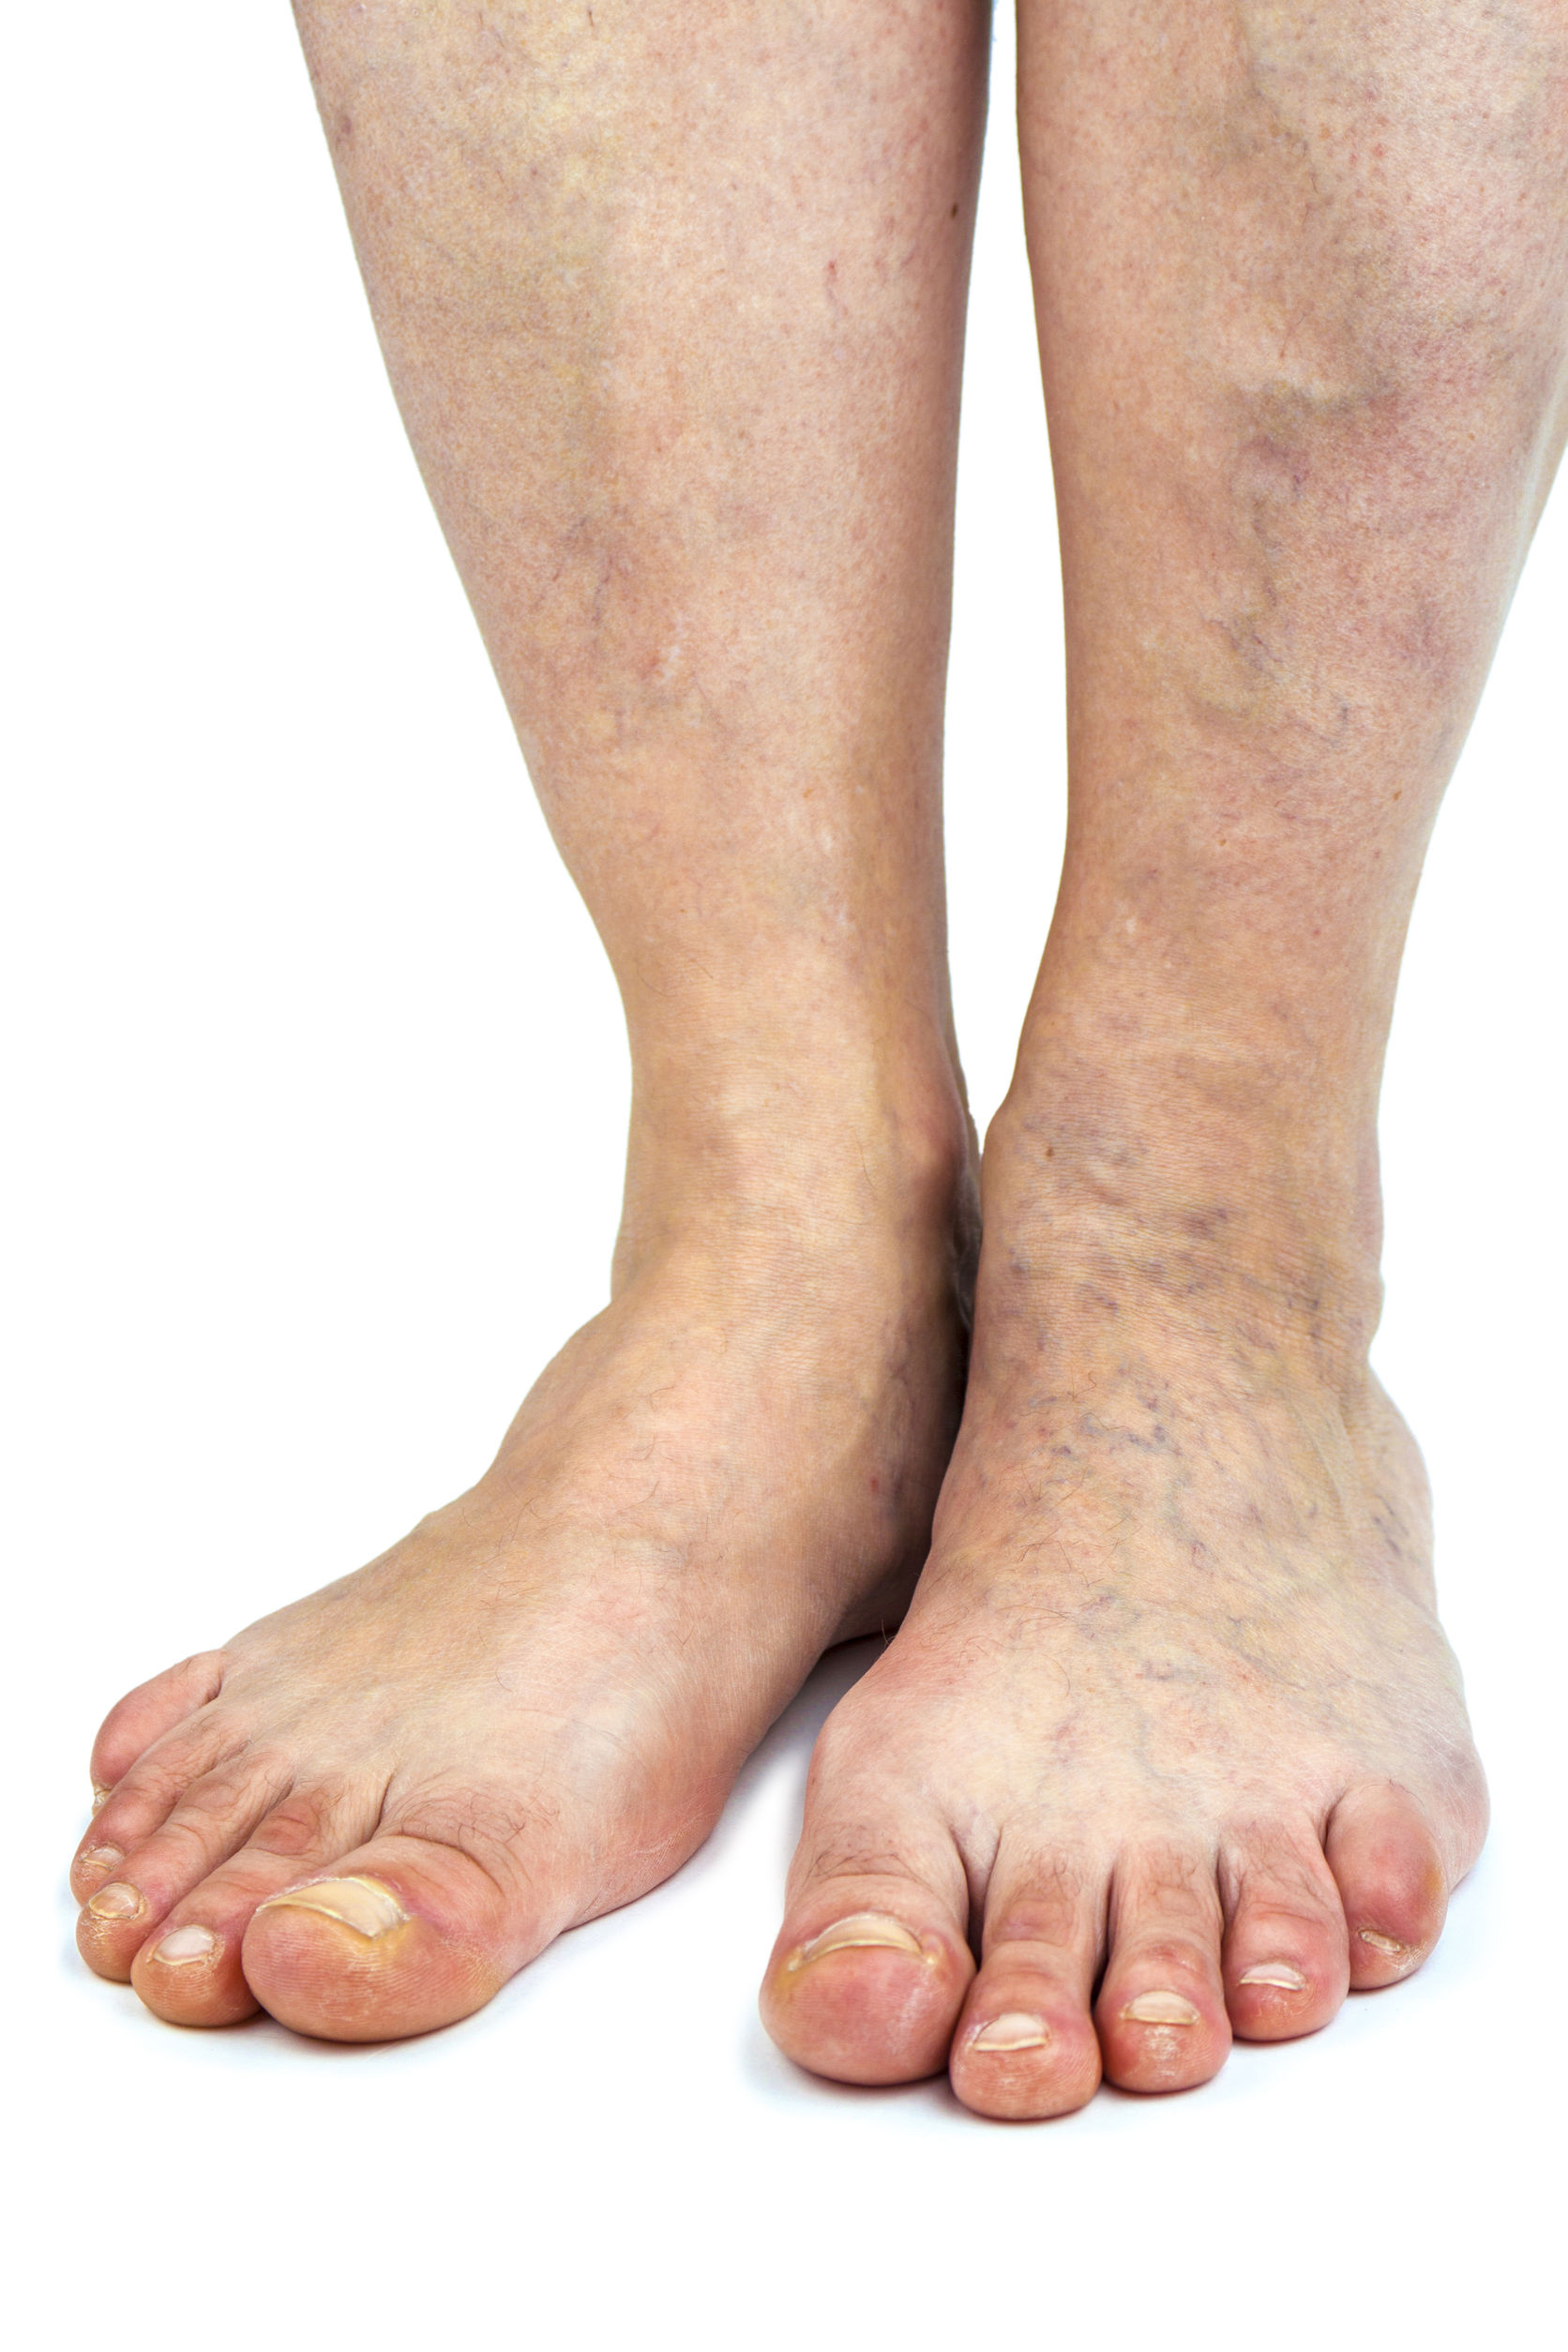 When to Visit a Center for Vein Restoration in Pennsylvania for Varicose Vein Diagnosis